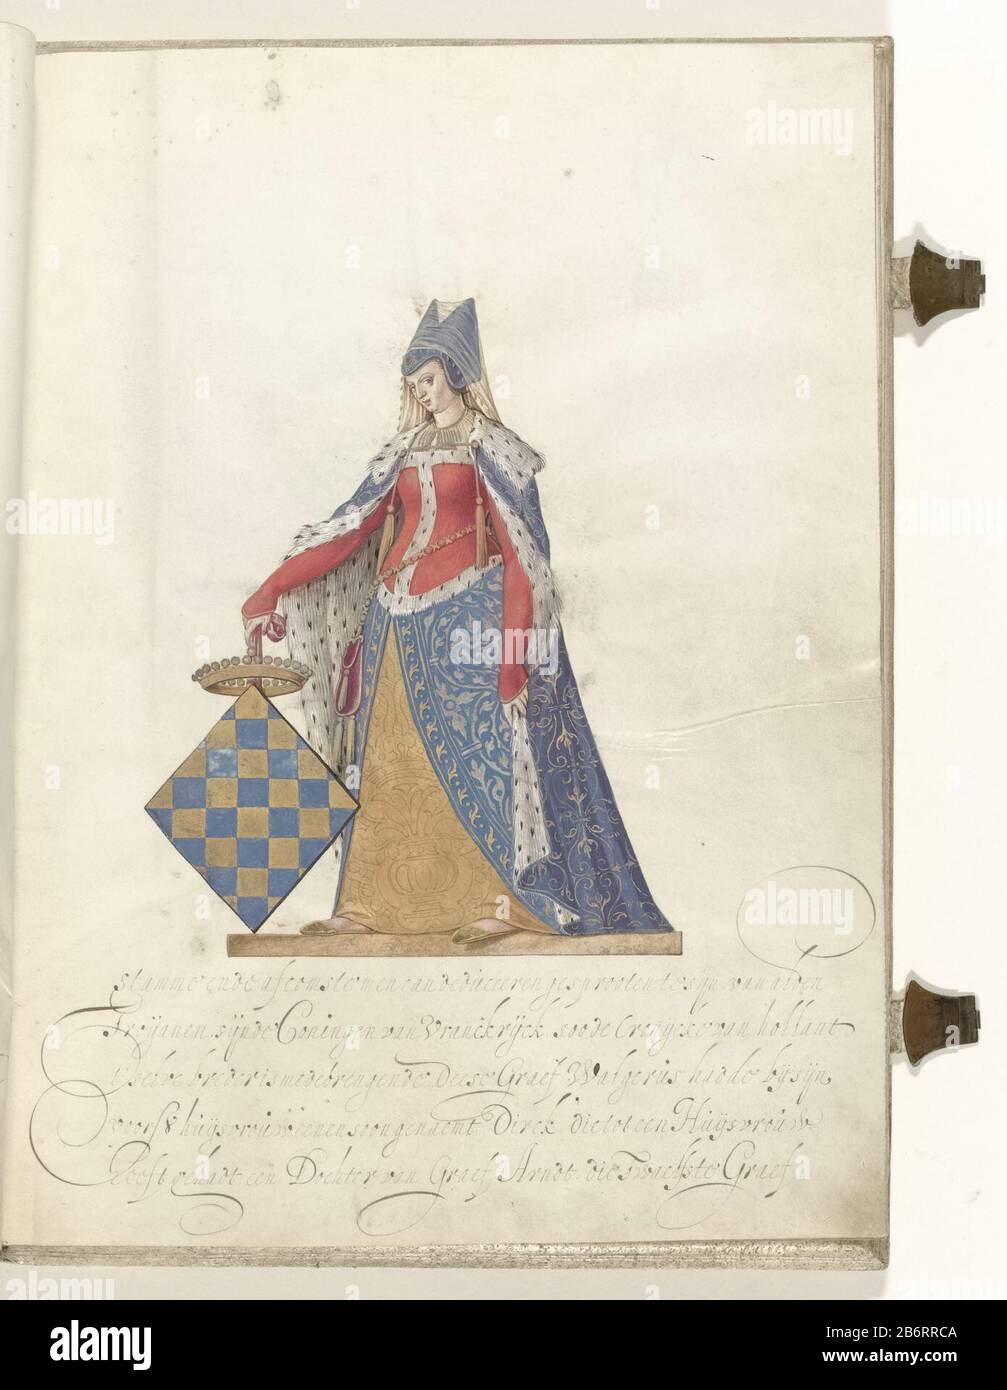 Gravin van Teisterbant Countess of Teisterbant, wife of Count Baldwin of Teisterbant. She was the daughter of the Count of Vermandois. Standing to toe with the arms of Vermandois. Part of illustrated manuscript with the genealogy of the lords and counts of Culemborg. Manufacturer : artist: Nicolaes Kemp (attributed to) author: anonymous place manufacture: Northern Netherlands Dating: ca. 1590 - ca. 1593 and / or 1600 - ca. 1625 Physical characteristics: pen or brush in colors on parchment, gouache material: parchment ink watercolor gold paint gouache (watercolor) Technique: painting / write di Stock Photo